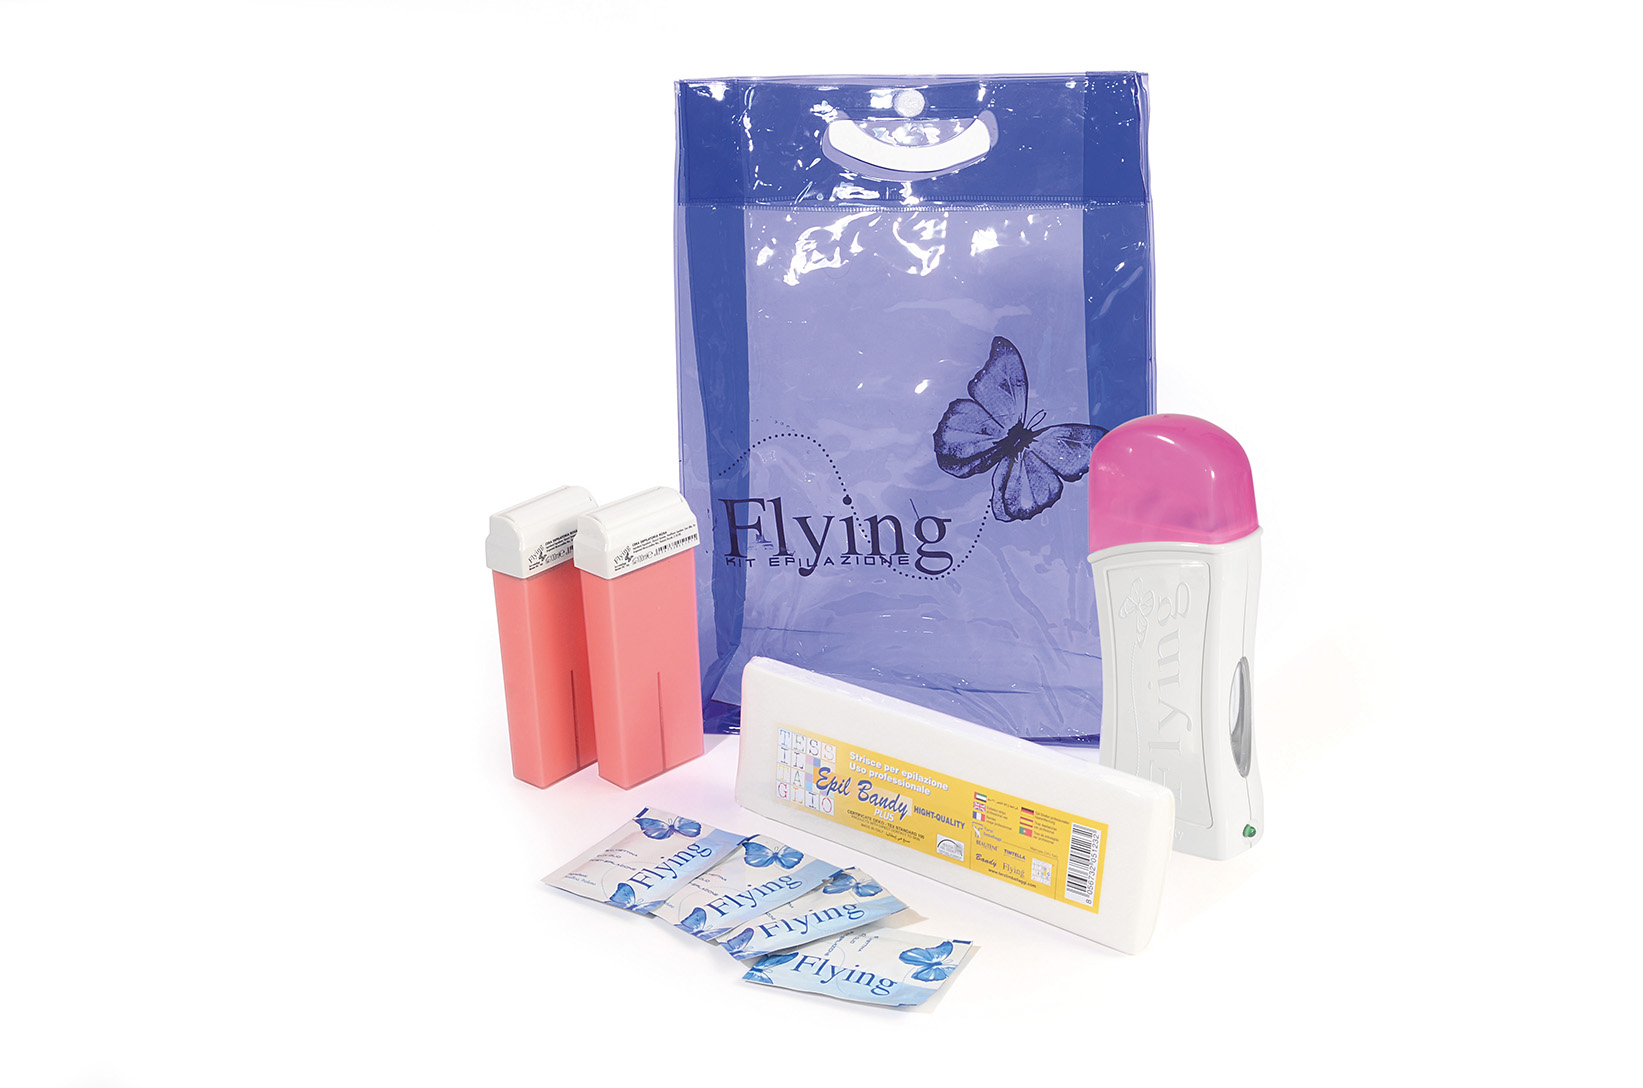 151176LUX - Epilation kit FLYING LUX: 1 wax heater, 2 wax roller refills, 1 epilation strips pack, 4 wipes soaked in after-wax oil